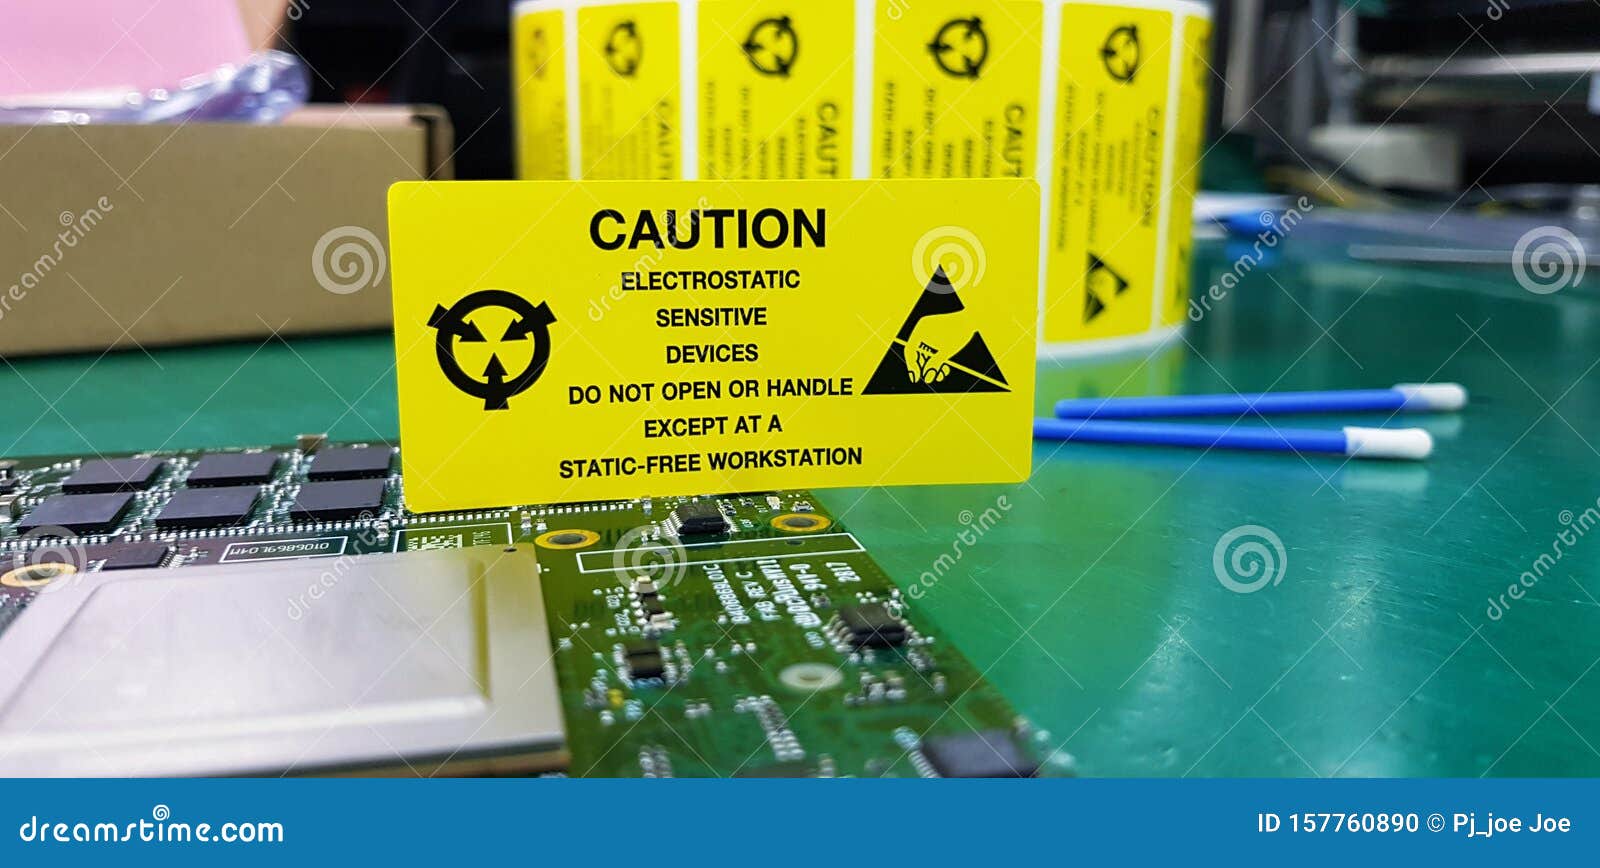 the yellow caution label for electrostatic sensitive devices esd on static free workstation